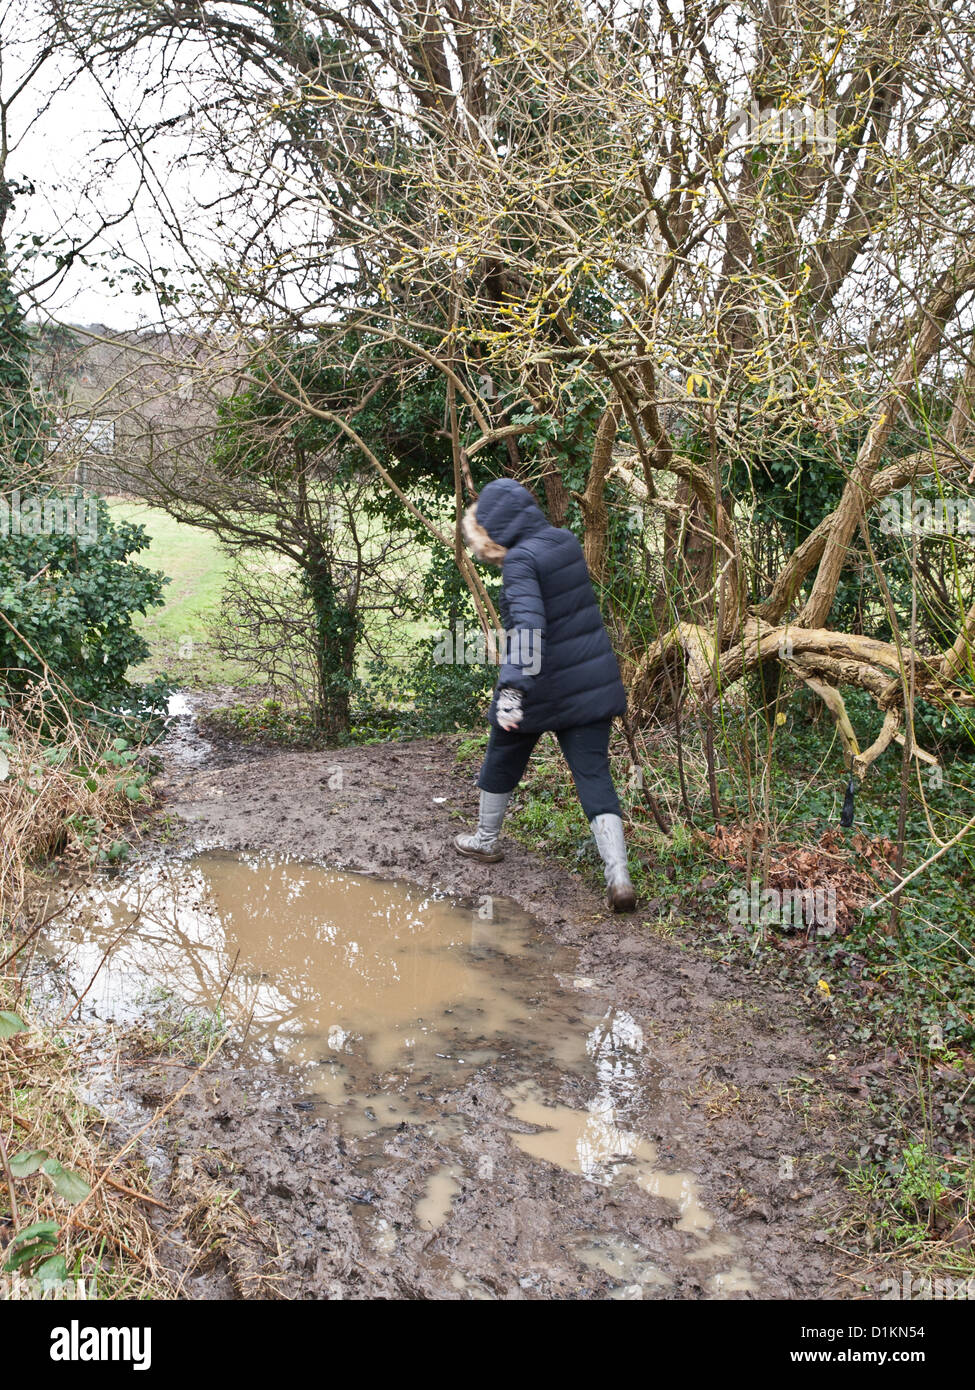 A wrapped up woman attempts to make her way around a muddy puddle during a winter downpour. Stock Photo